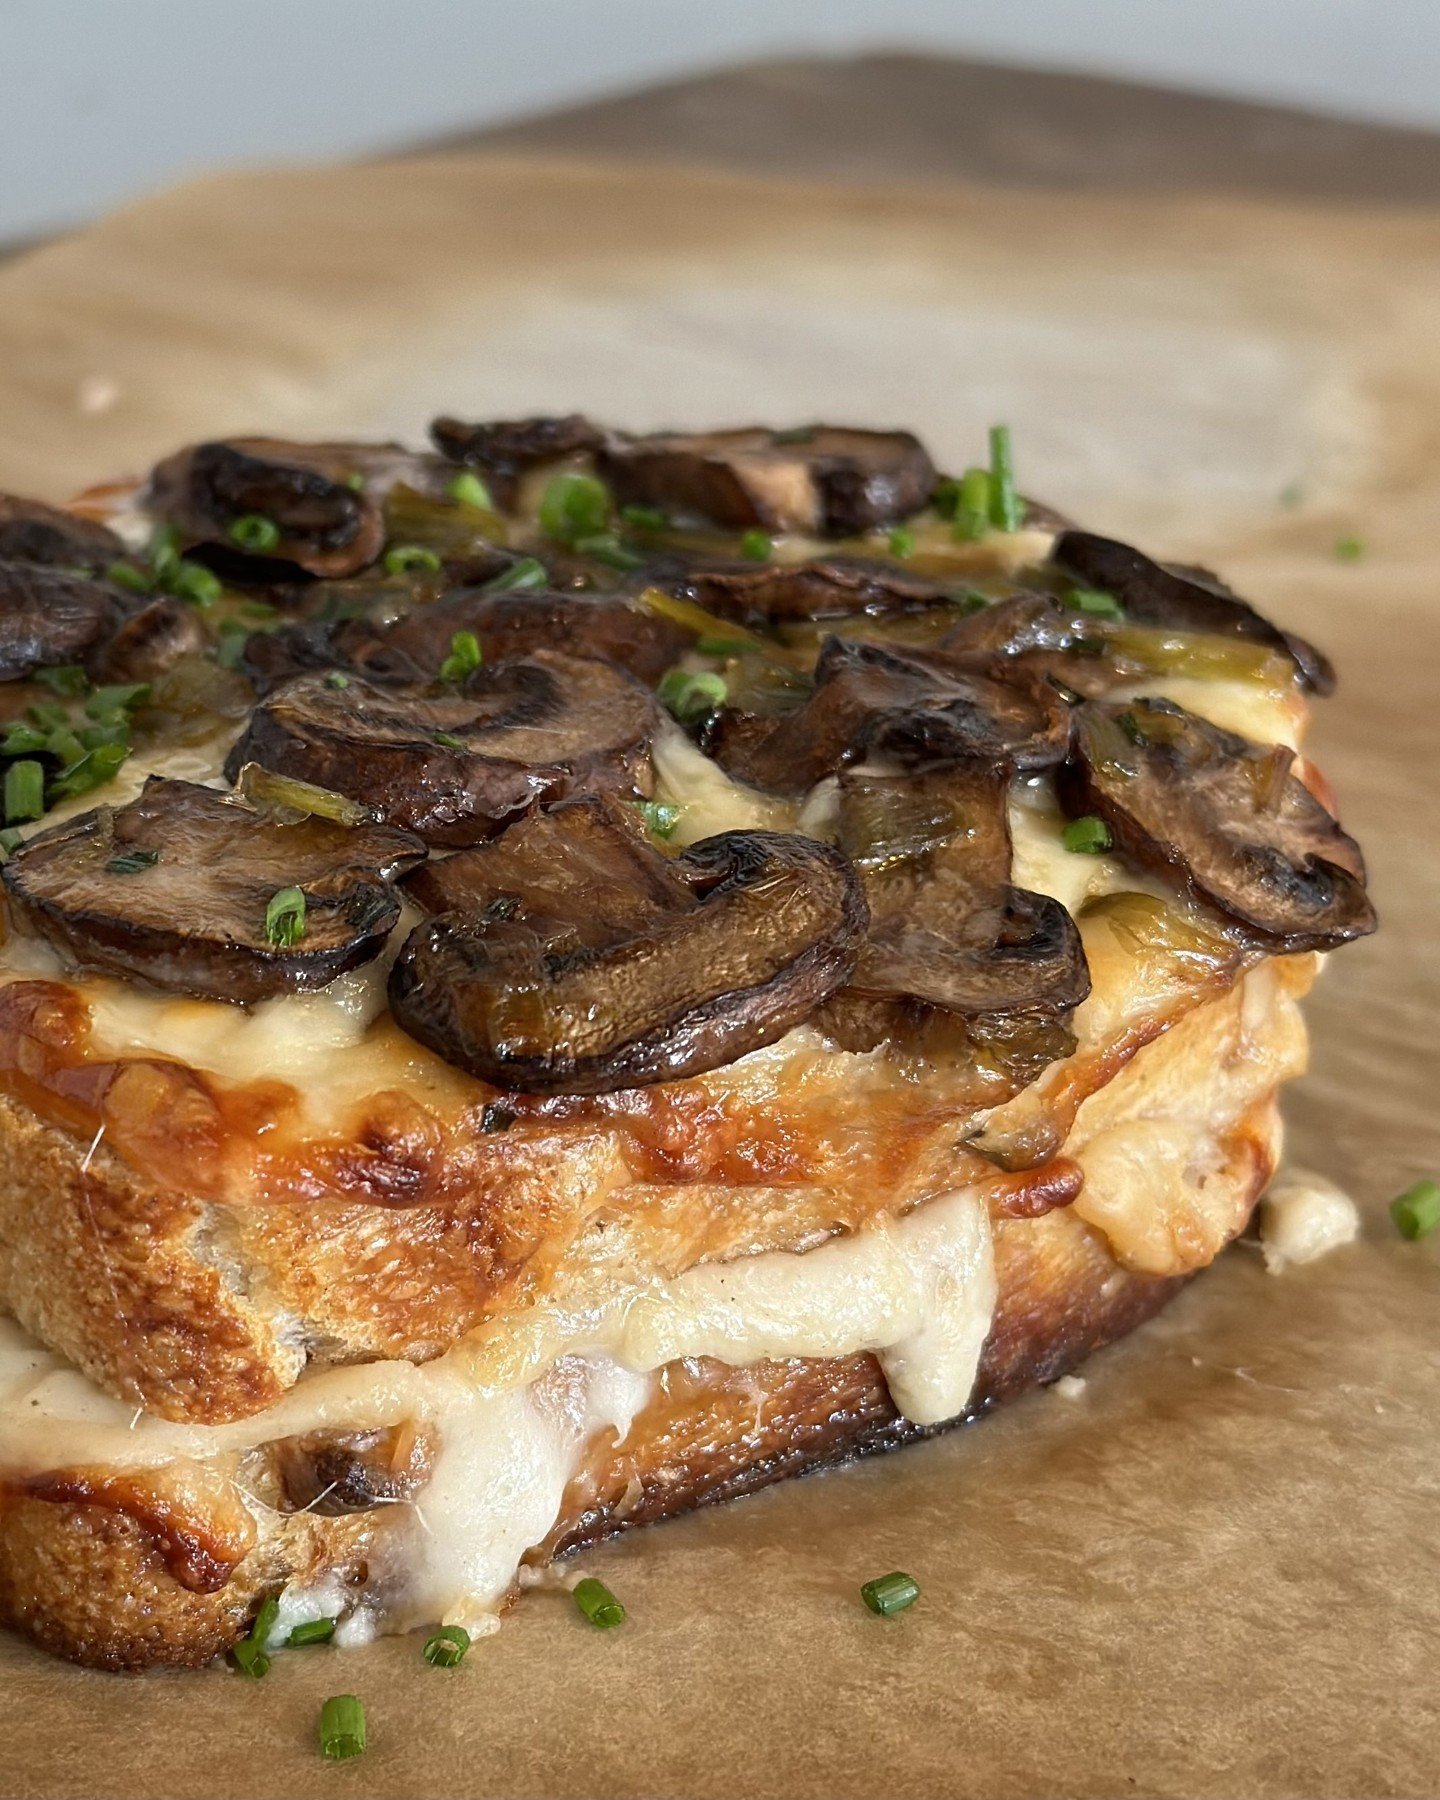 Today is the day! Our Mushroom Croque Monsieur is available in a limited quantity TODAY ONLY starting at 8am! With roasted mushrooms, leeks, black truffle oil, b&eacute;chamel, gruy&egrave;re, and freshly baked pain de campagne, you won't want to mis